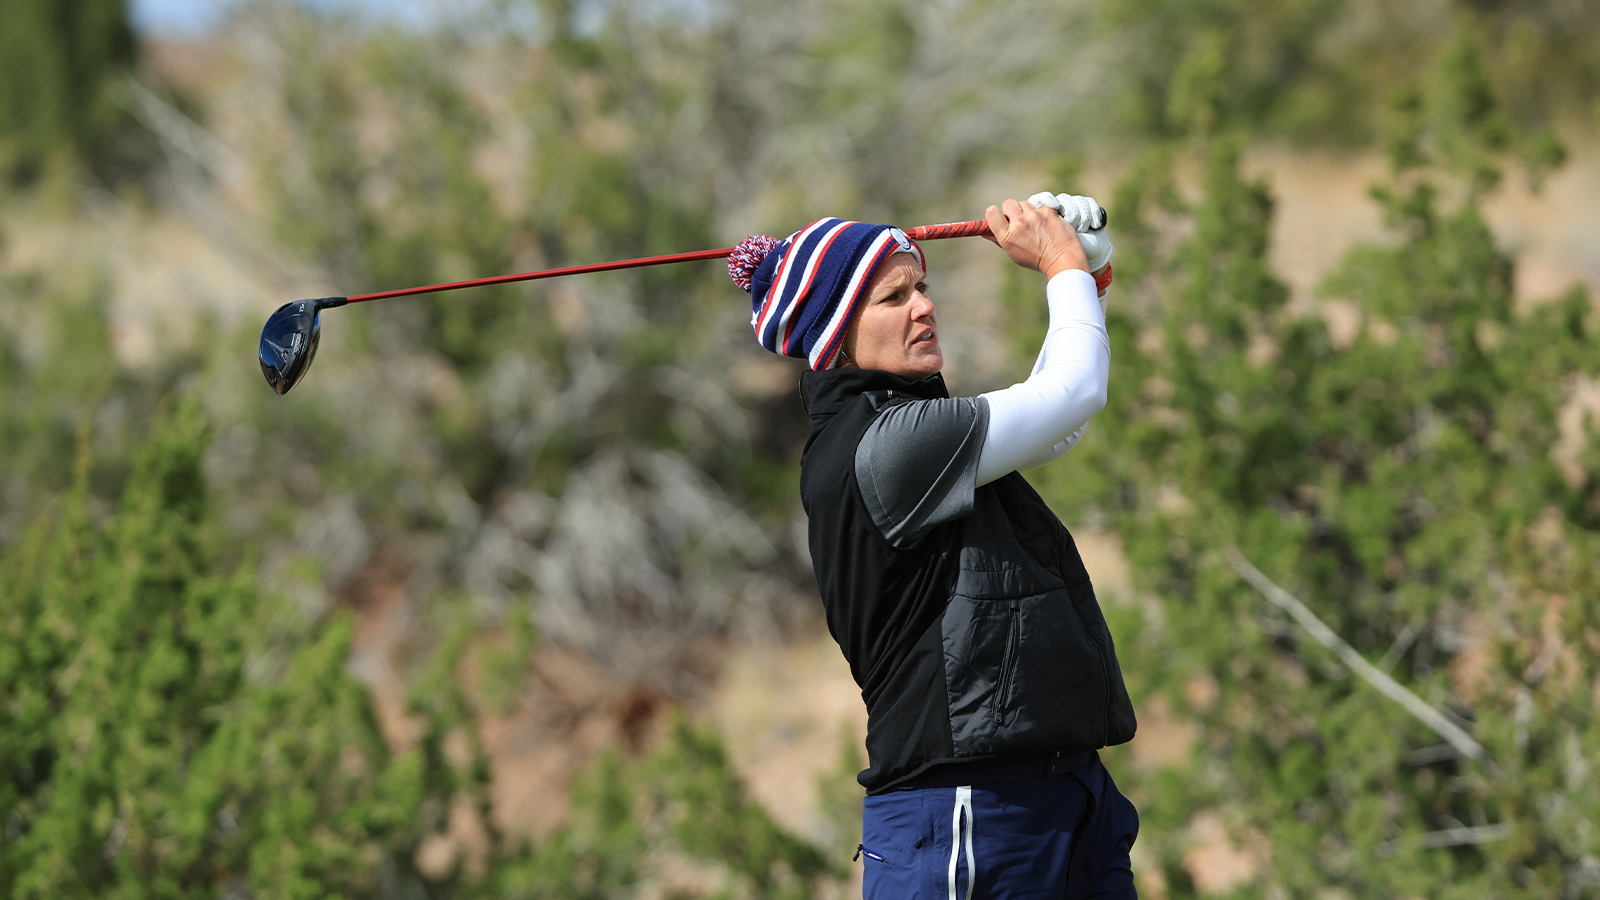 Jennifer Borocz of Team USA watches after hitting her tee shot at the fourteenth hole during the first round of the 2nd Women's PGA Cup at Twin Warriors Golf Club on Thursday, October 27, 2022 in Santa Ana Pueblo, New Mexico. (Photo by Sam Greenwood/PGA of America)